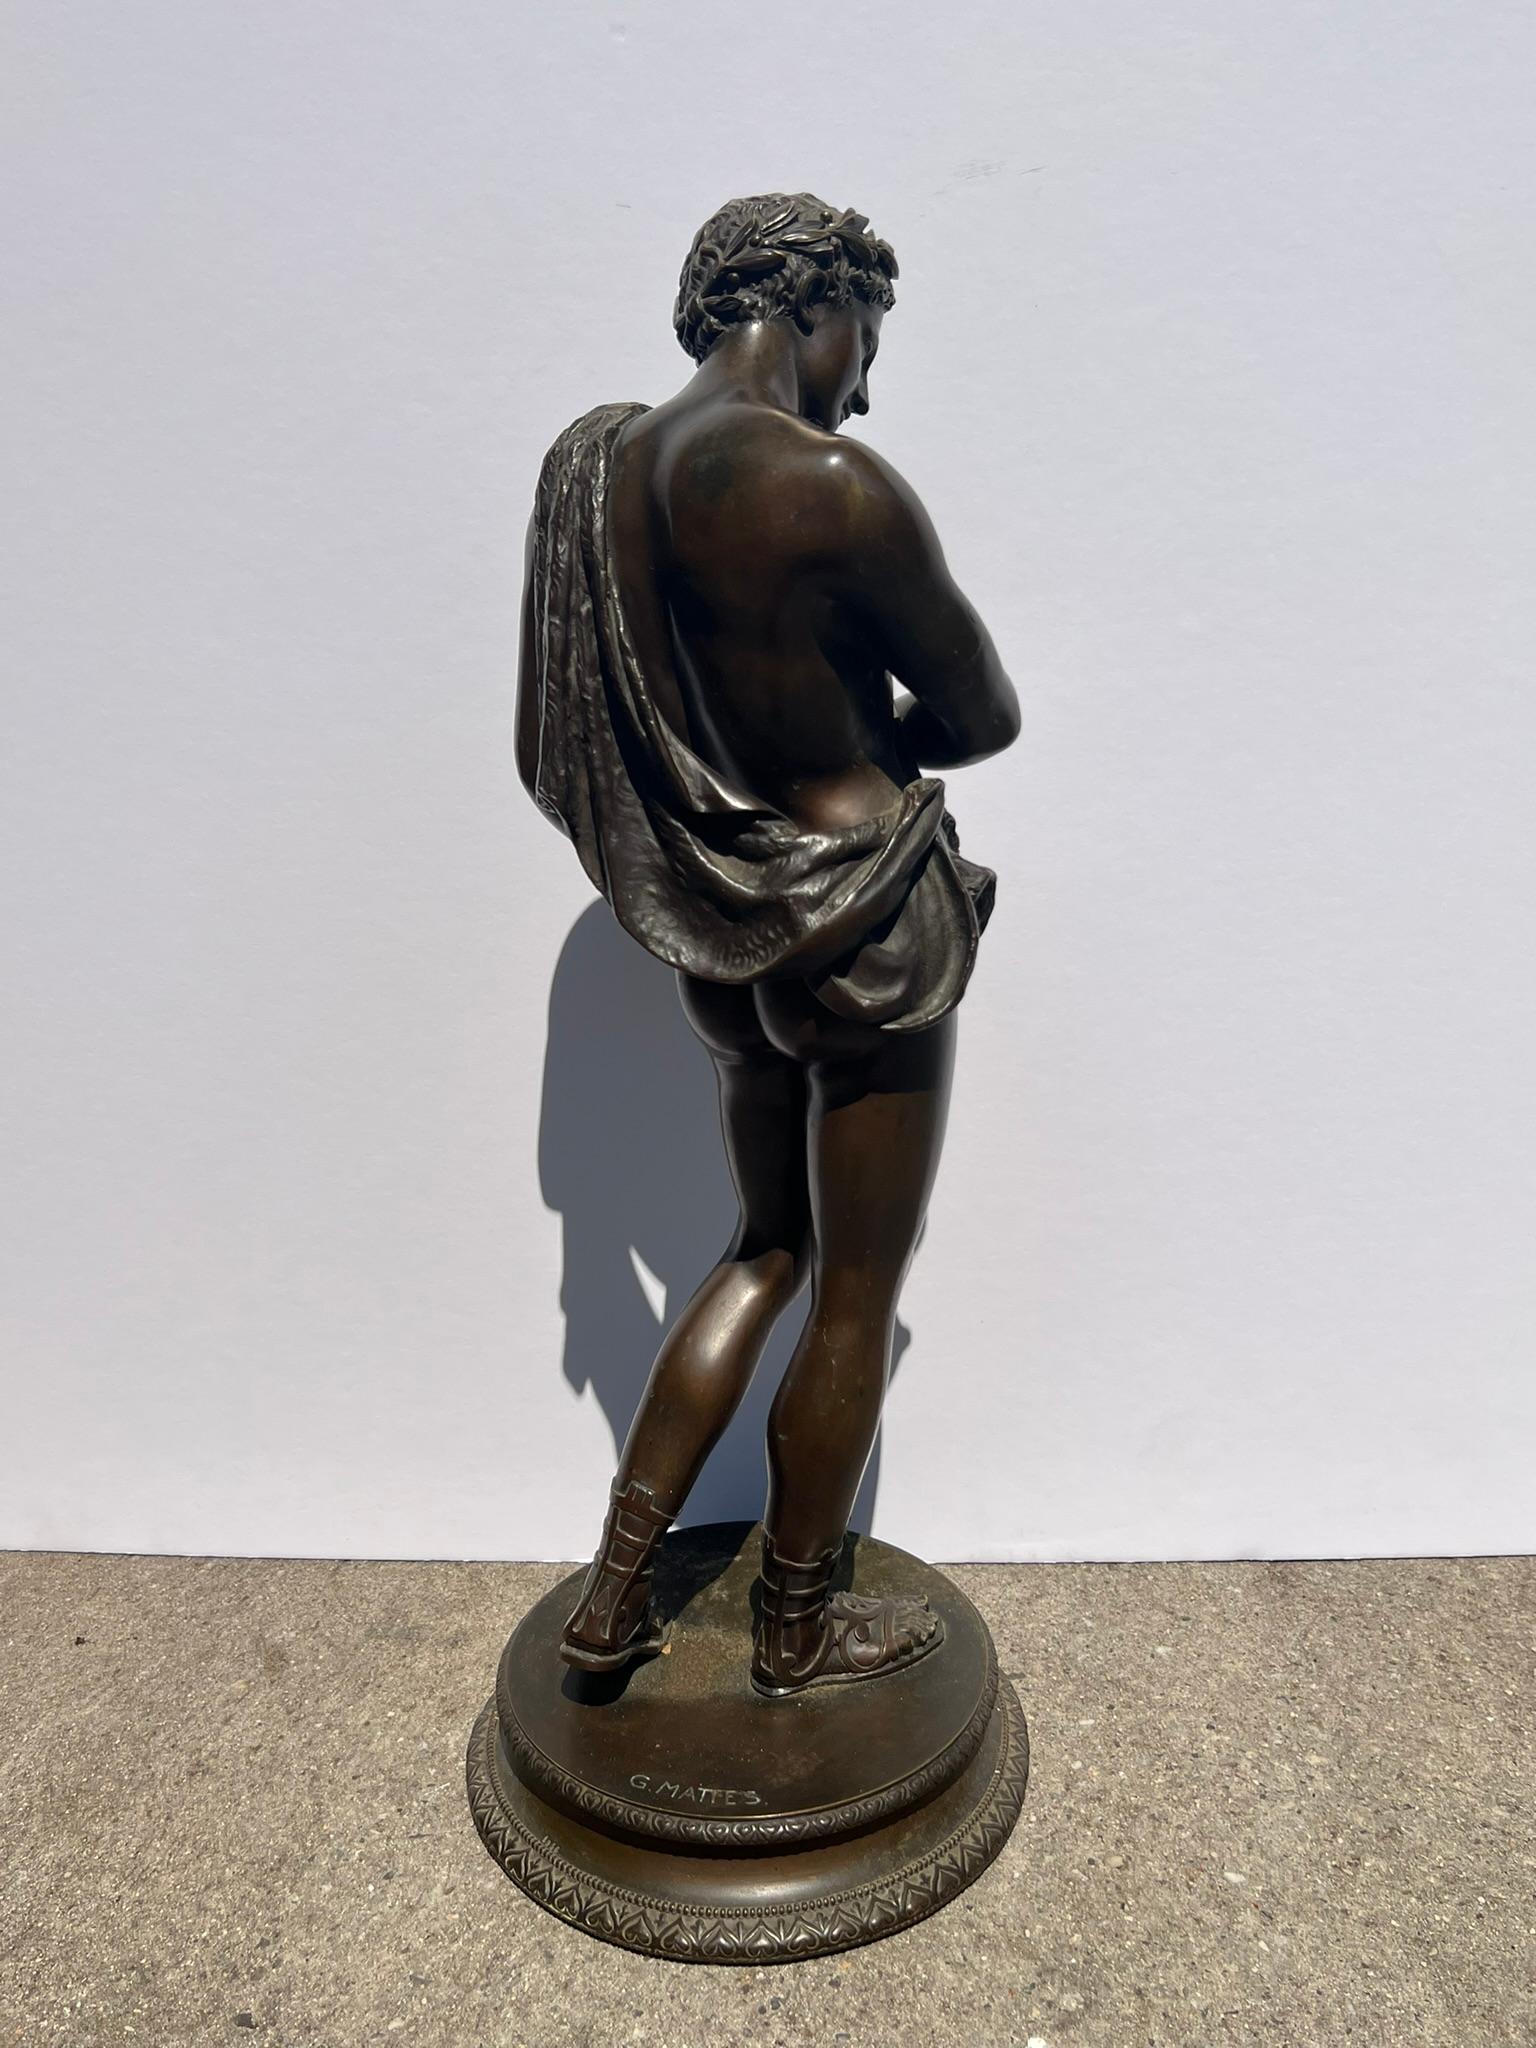 28” Orpheus Antique Bronze Sculpture Male Nude with Lyre by George Mattes 1900 For Sale 3